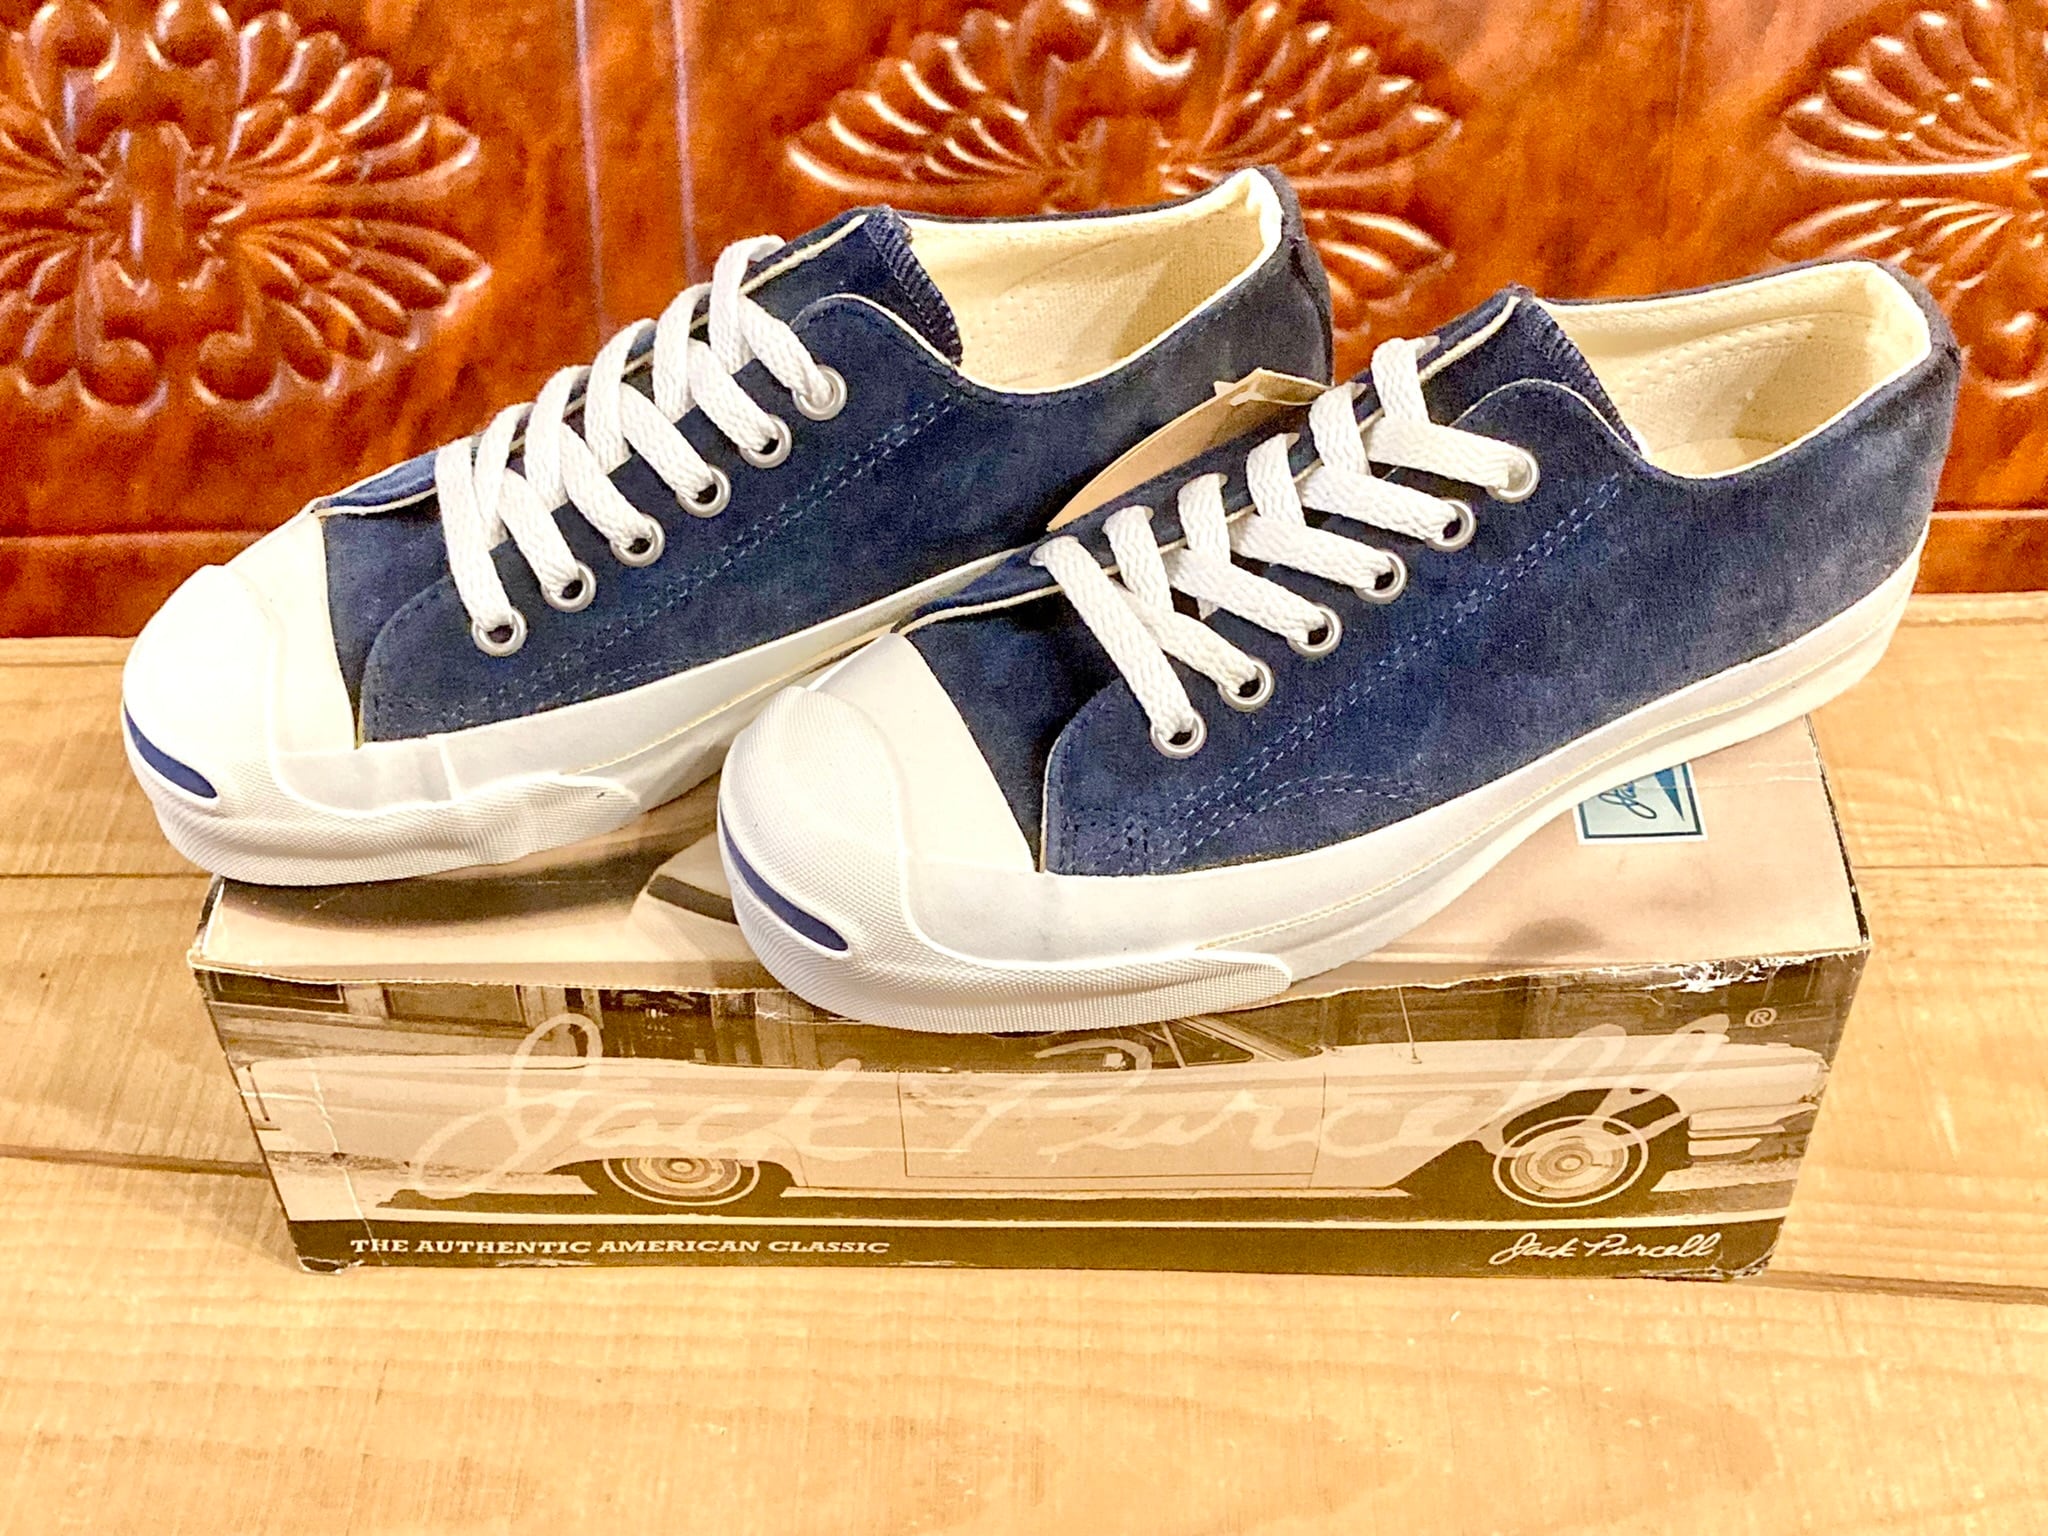 90s jack Purcell ジャックパーセル made in usa